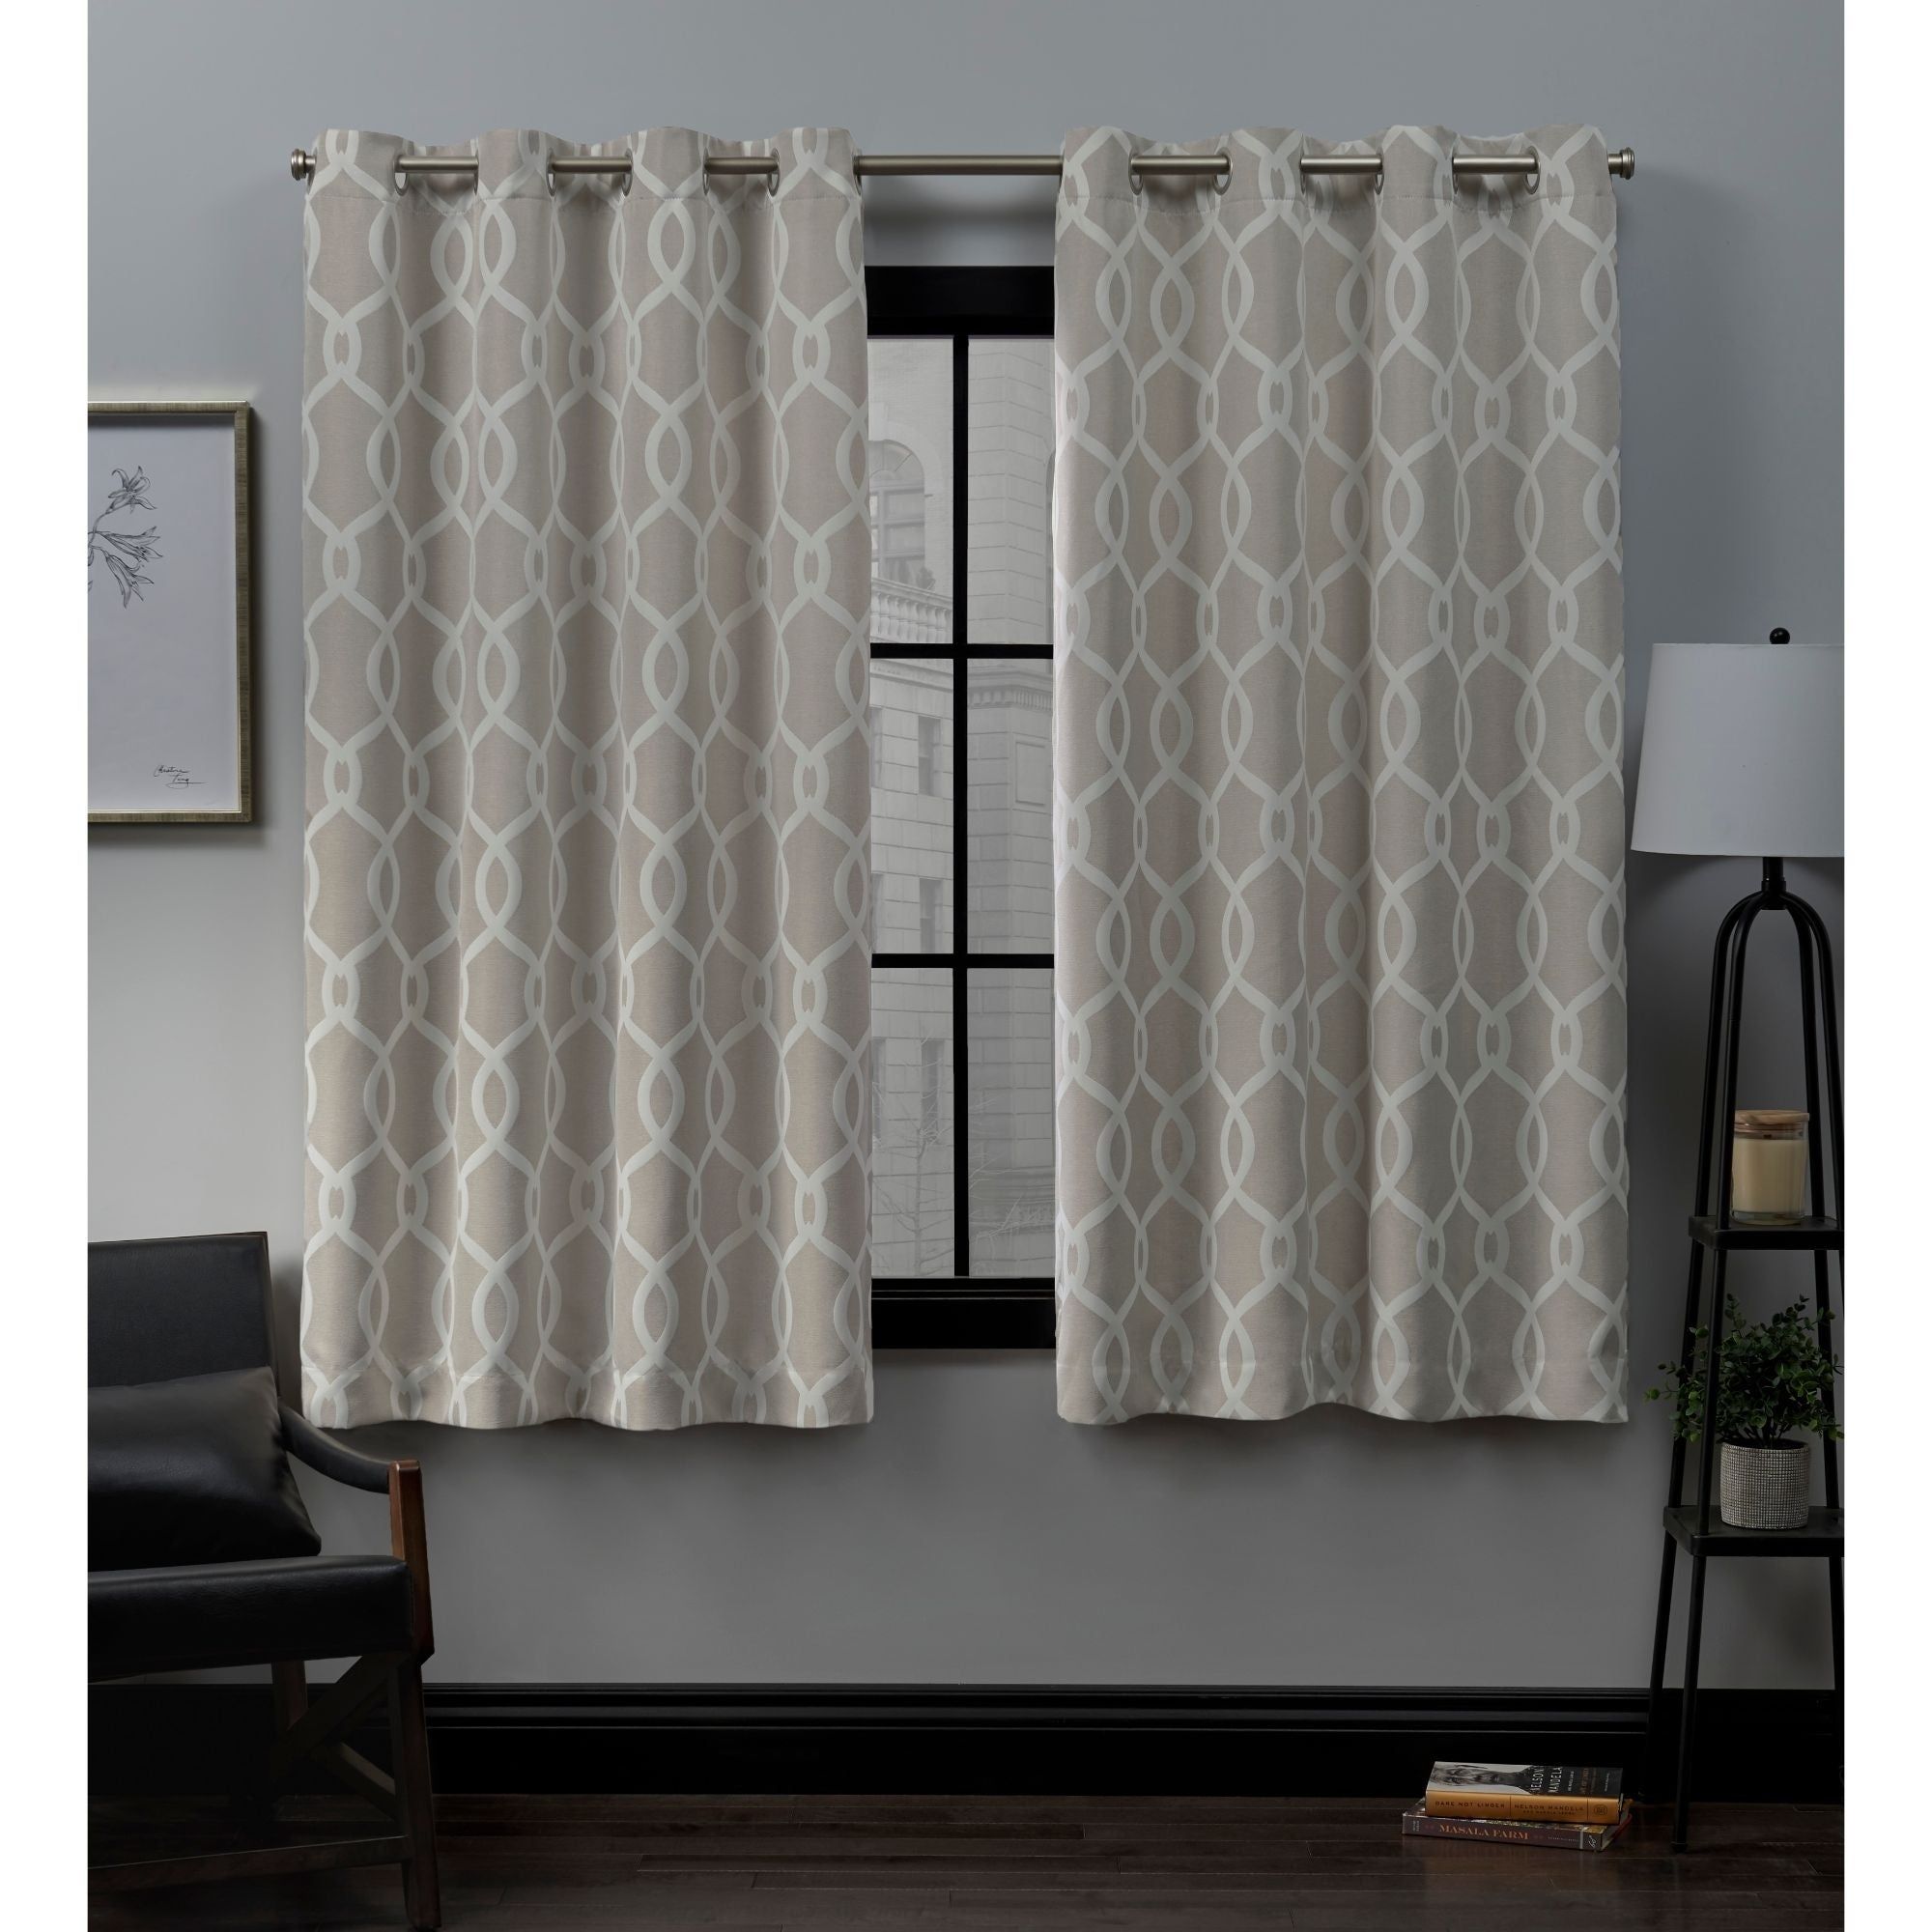 Ati Home Trilogi Woven Blackout Grommet Top Curtain Panel Pair In The Curated Nomad Duane Blackout Curtain Panel Pairs (View 29 of 30)